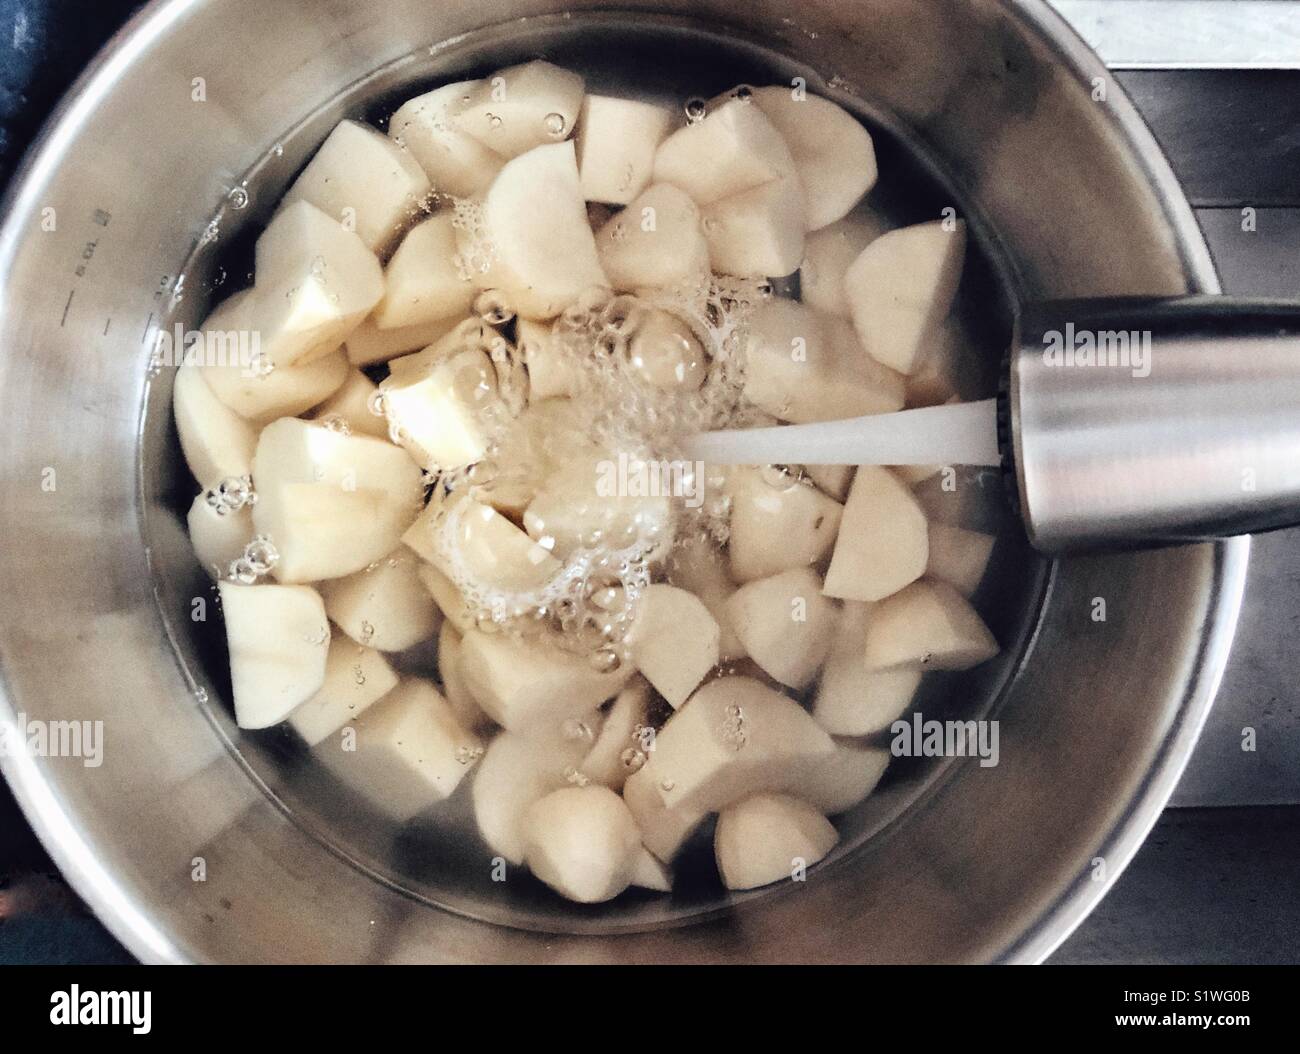 Filling a large stainless steel pot full of cubed white potatoes for boiling Stock Photo